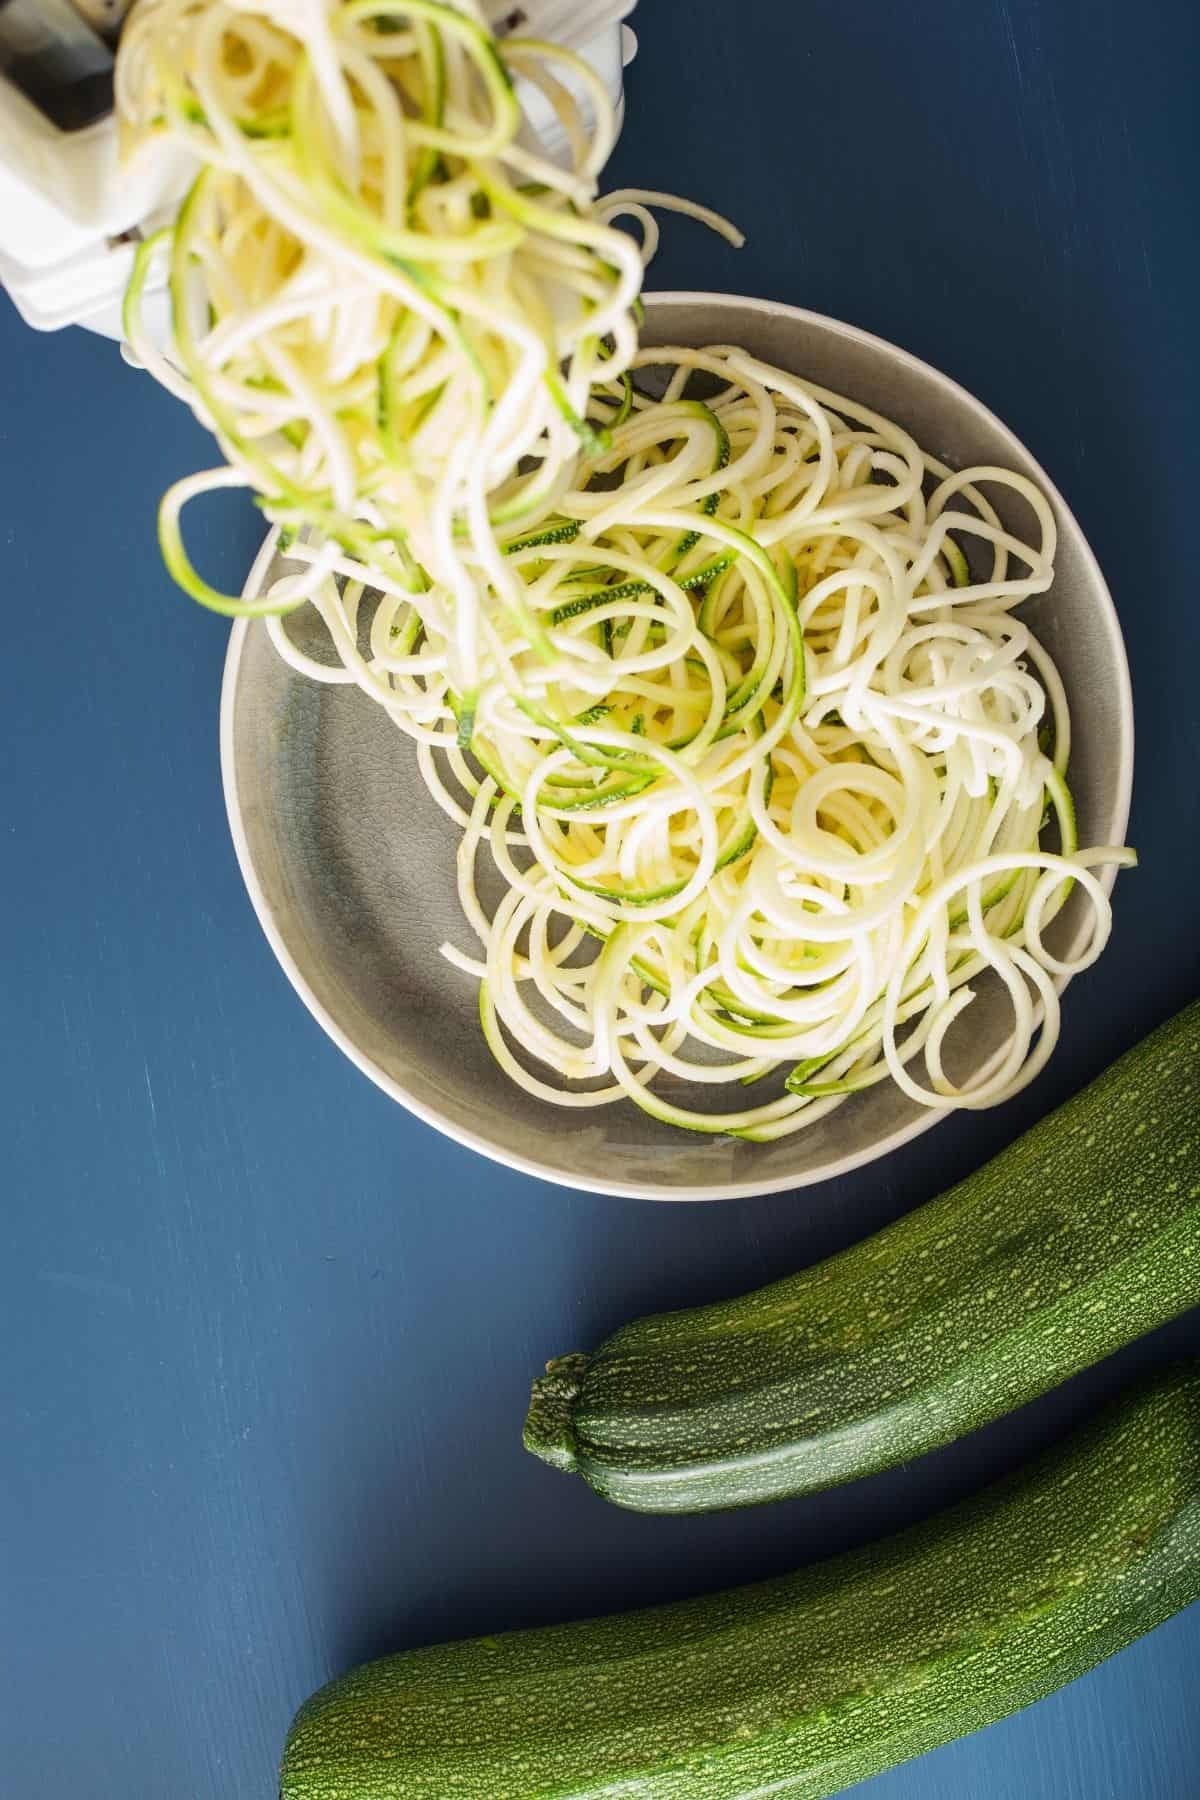 Over head view of Making zucchini noodle with a spiralizer